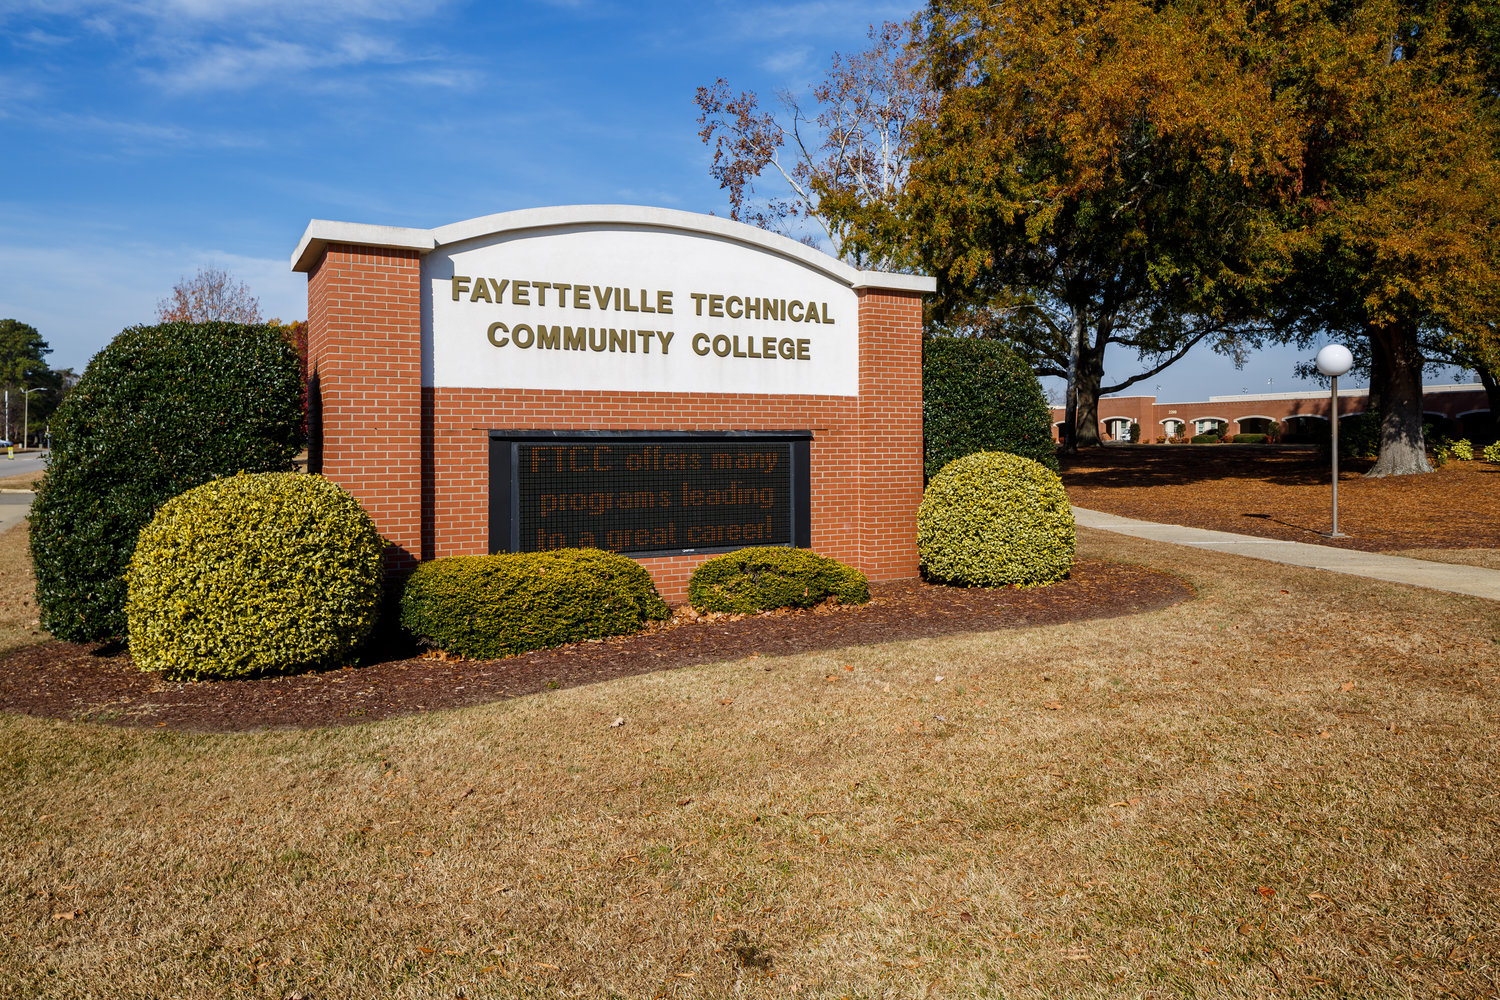 The Fayetteville Technical Community College board of trustees is moving forward in its search to find a new president. In a special meeting Thursday, the board accepted a list of finalists for the position.